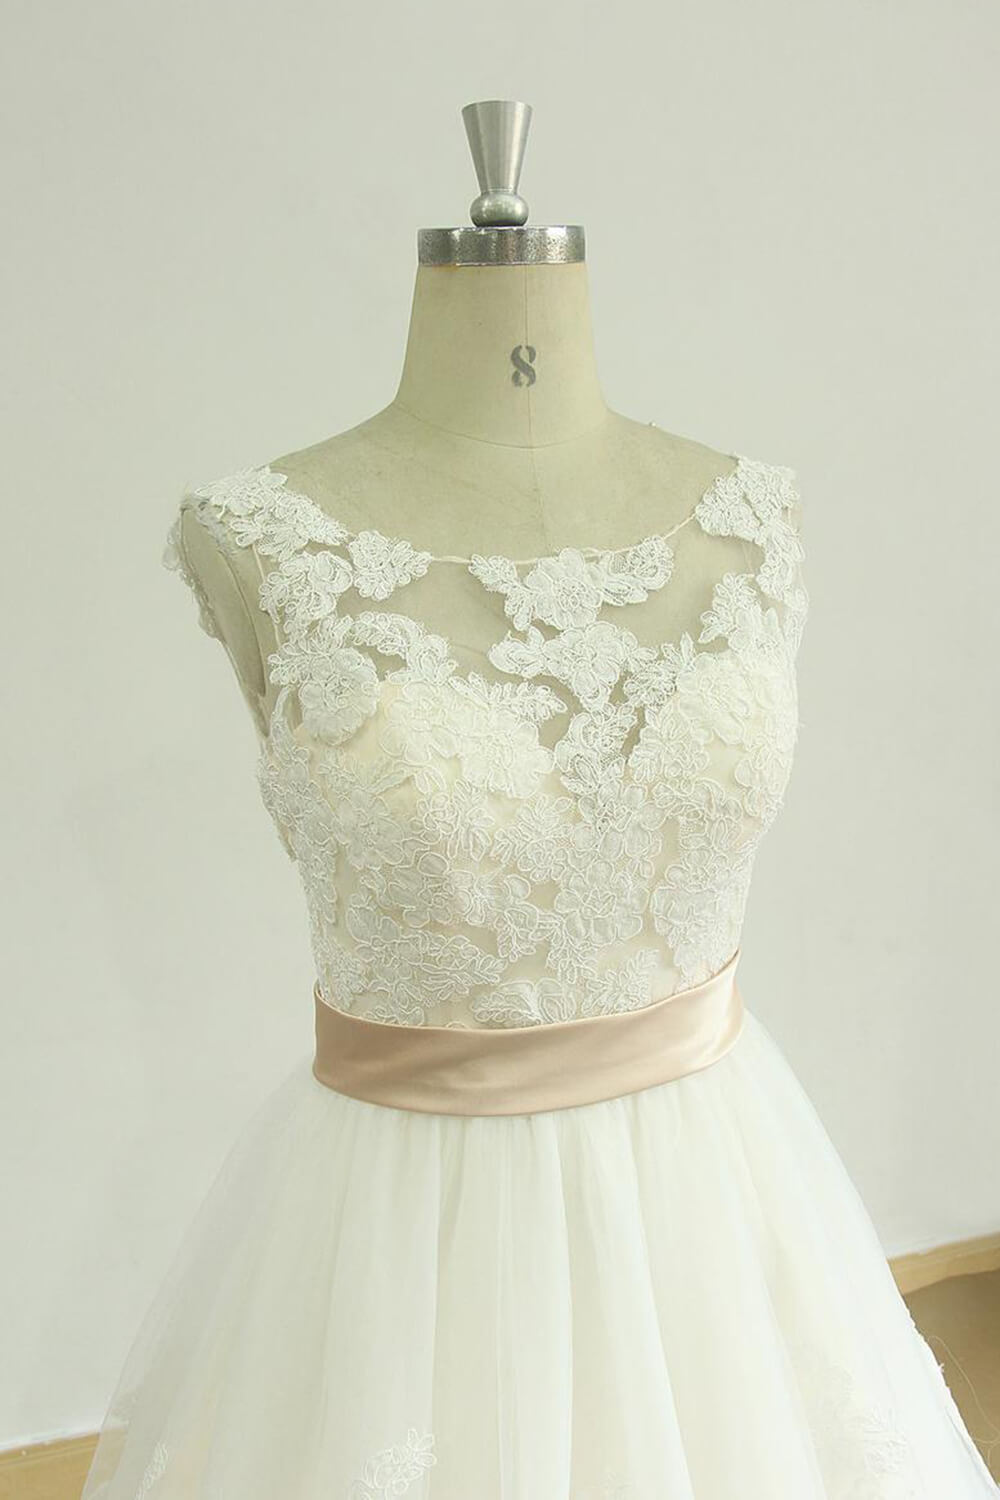 Chic Jewel Lace Appliques Wedding Dress Sleeveless Tulle A-line Bridal Gowns On Sale-27dress